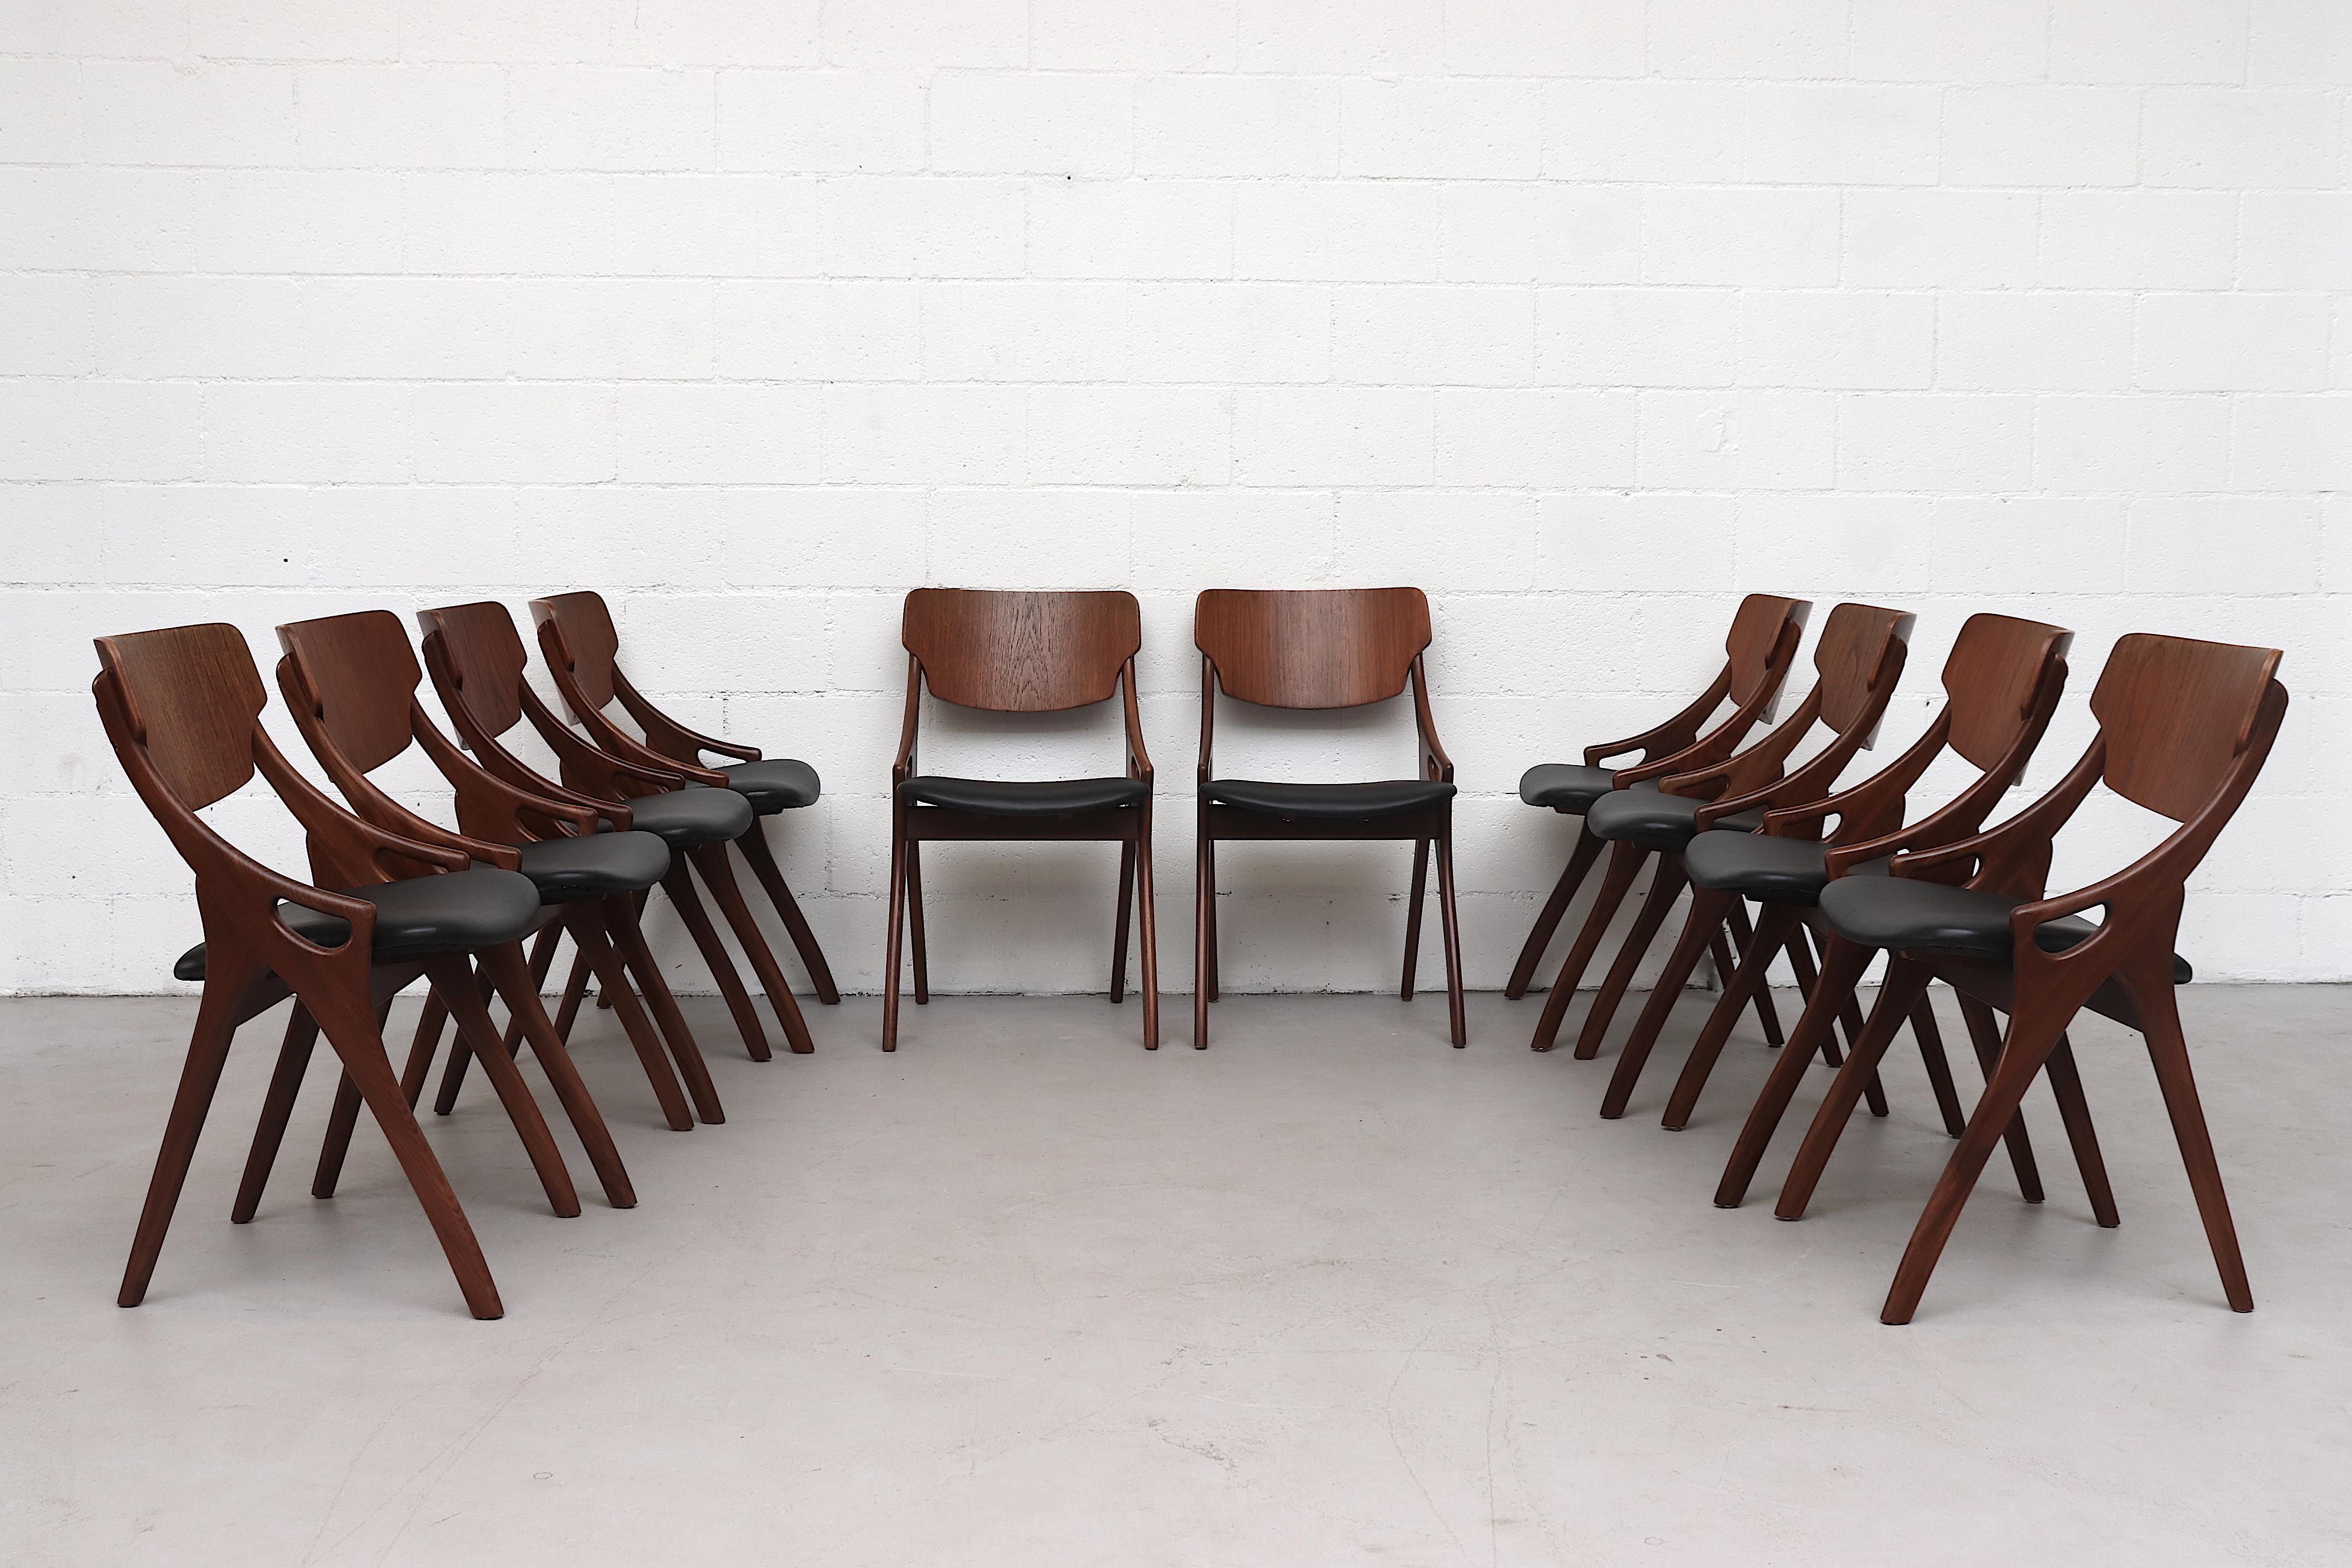 Set of ten teak dining chairs by Arne Hovmand Olsen for Mogens Kold. Manufactured in the 1950s, Denmark. Each chair features organically sculpted teak arms with teak backrests and original black skai seating with visible wear. All the chairs are in